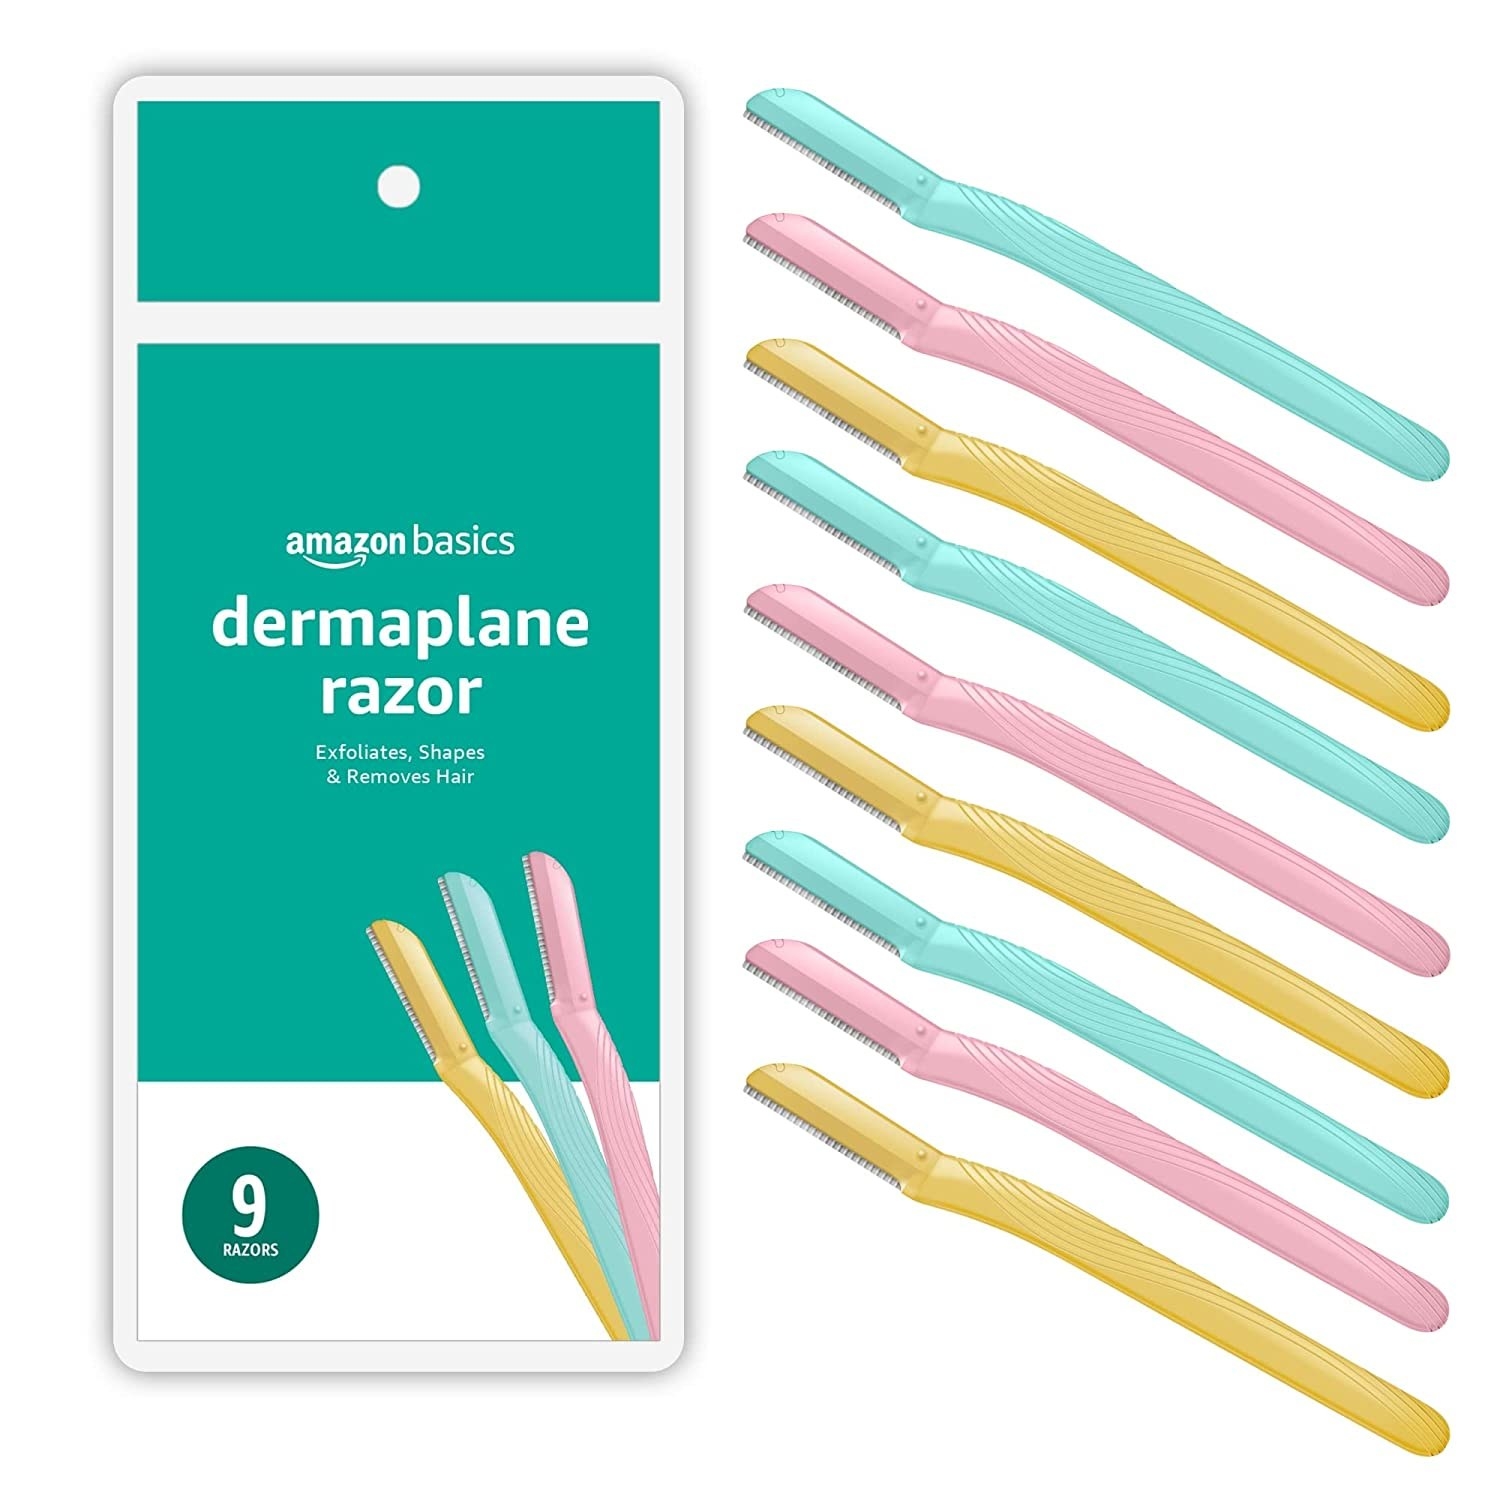 nine dermaplaning razors in pink, blue, and yellow